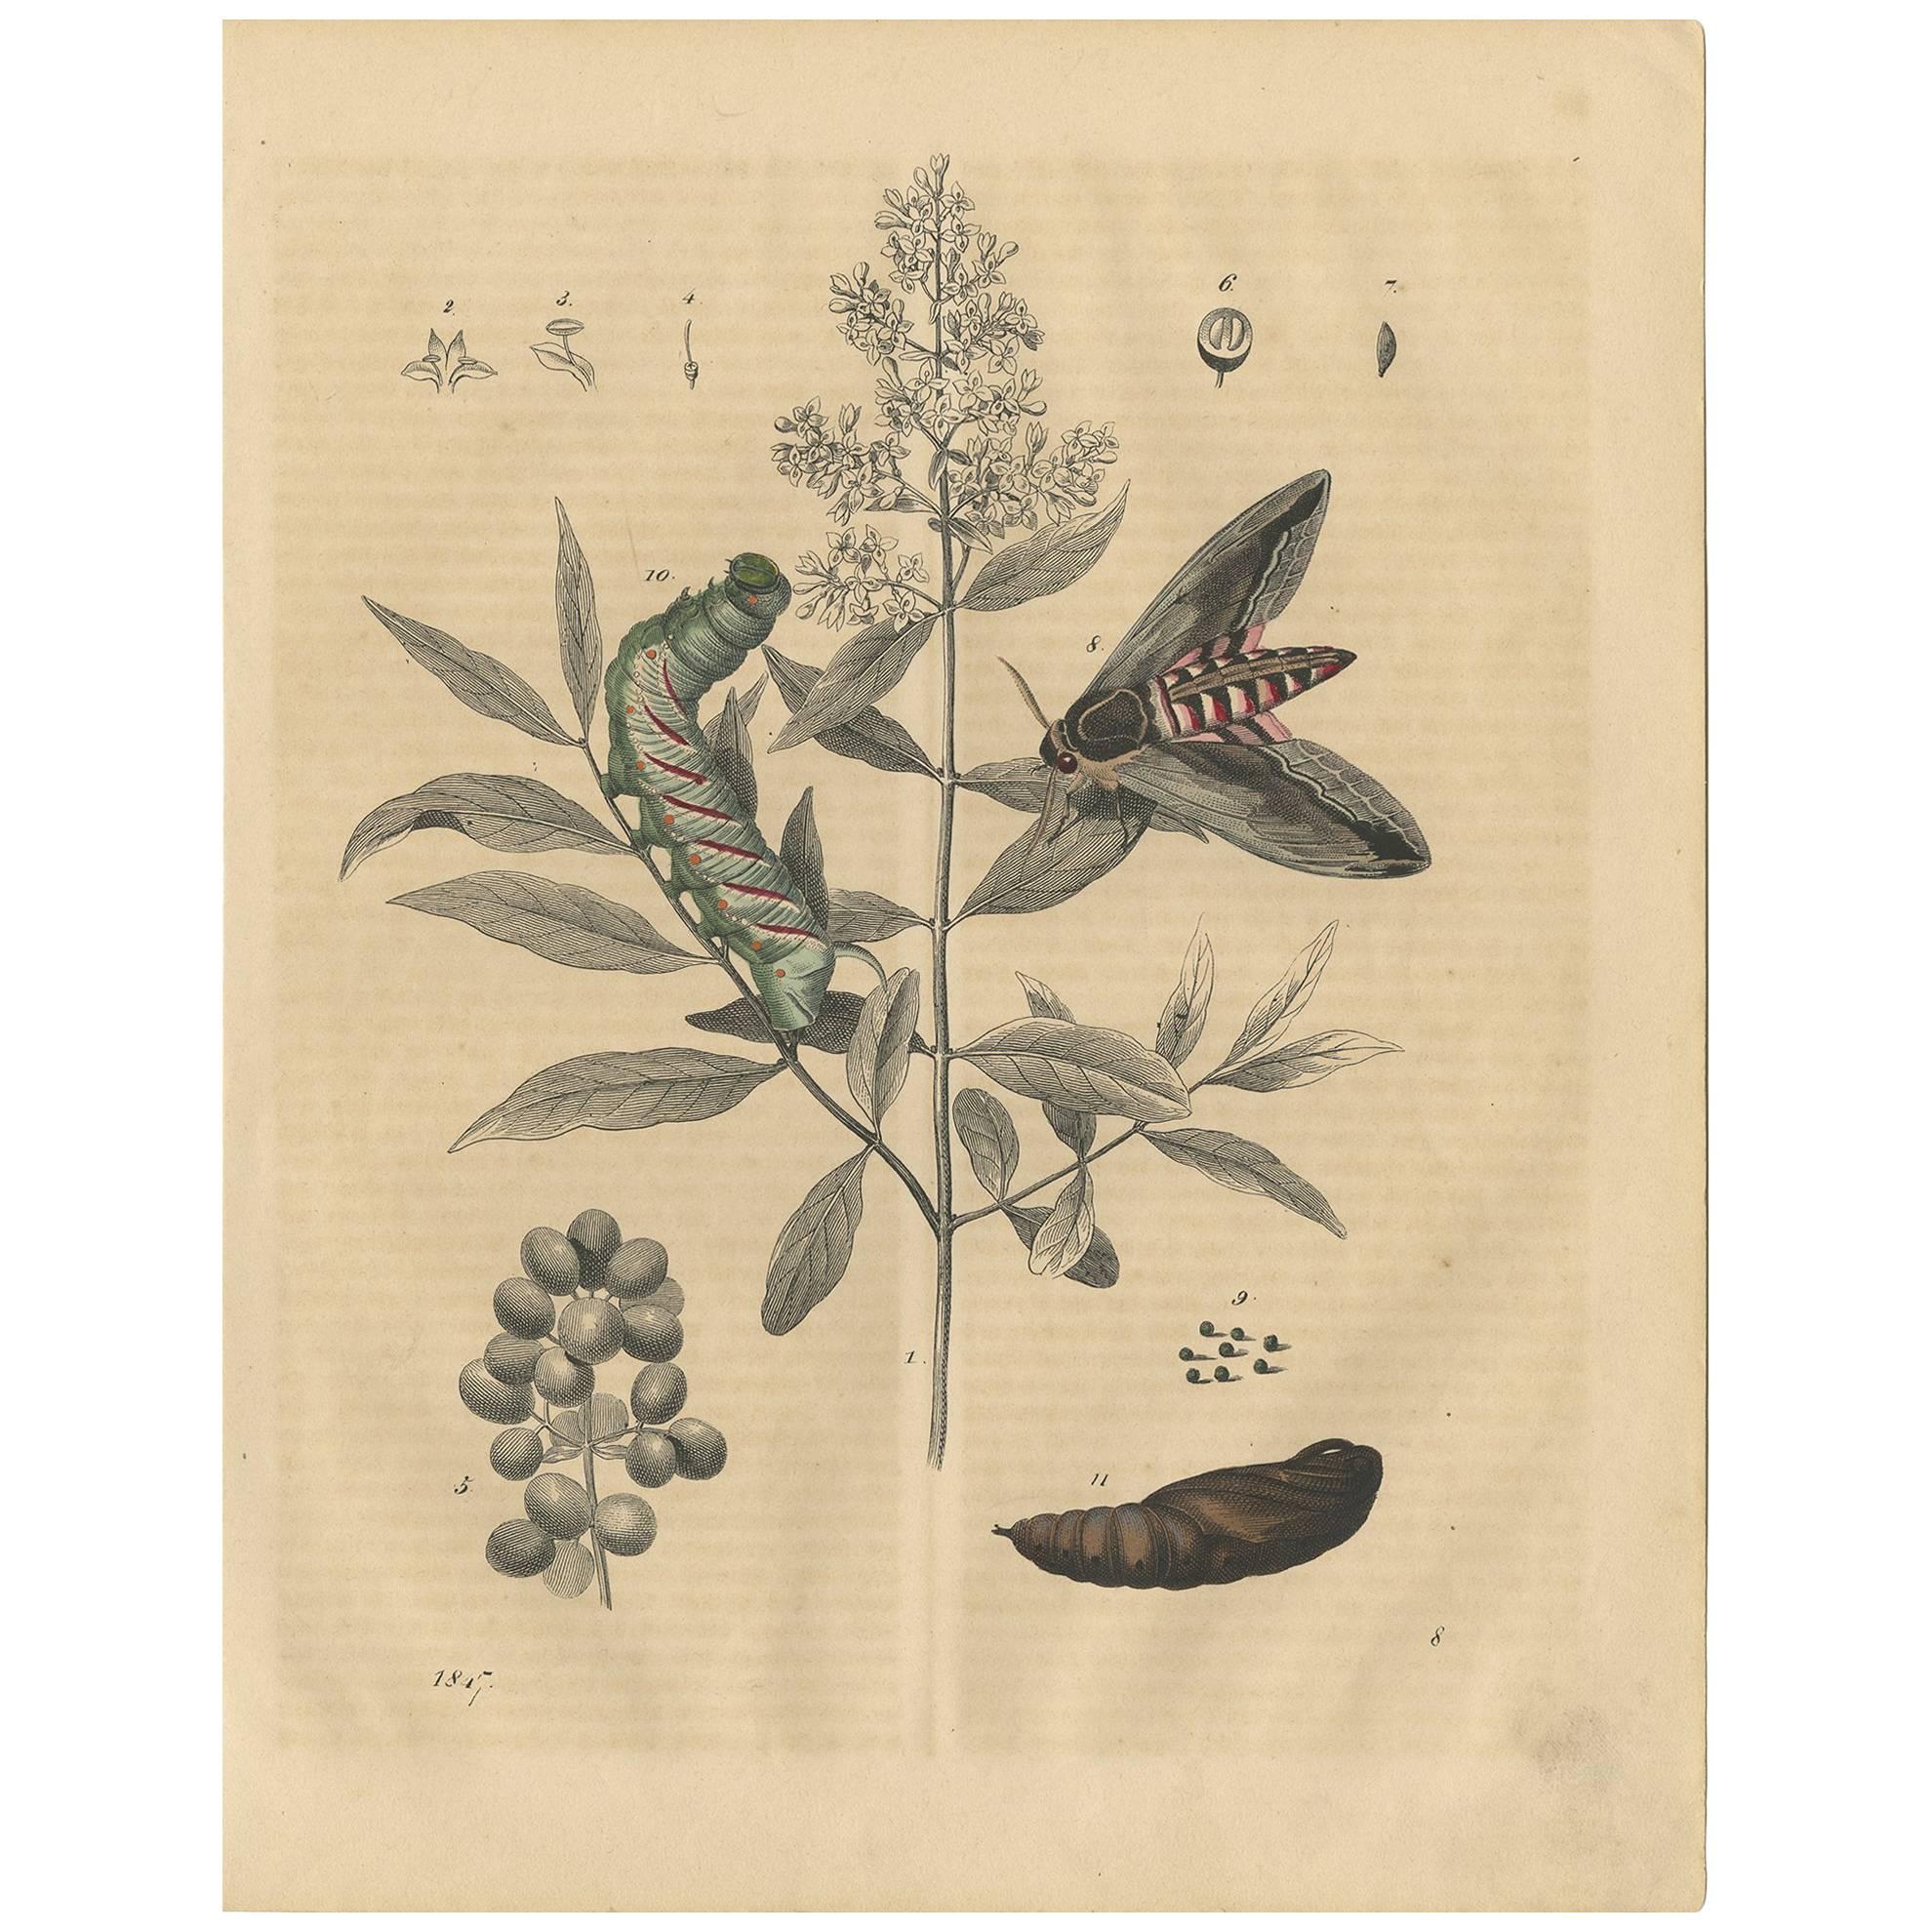 Antique Animal Print of a Moth, Caterpillar and Pupa by C. Hoffmann, 1847